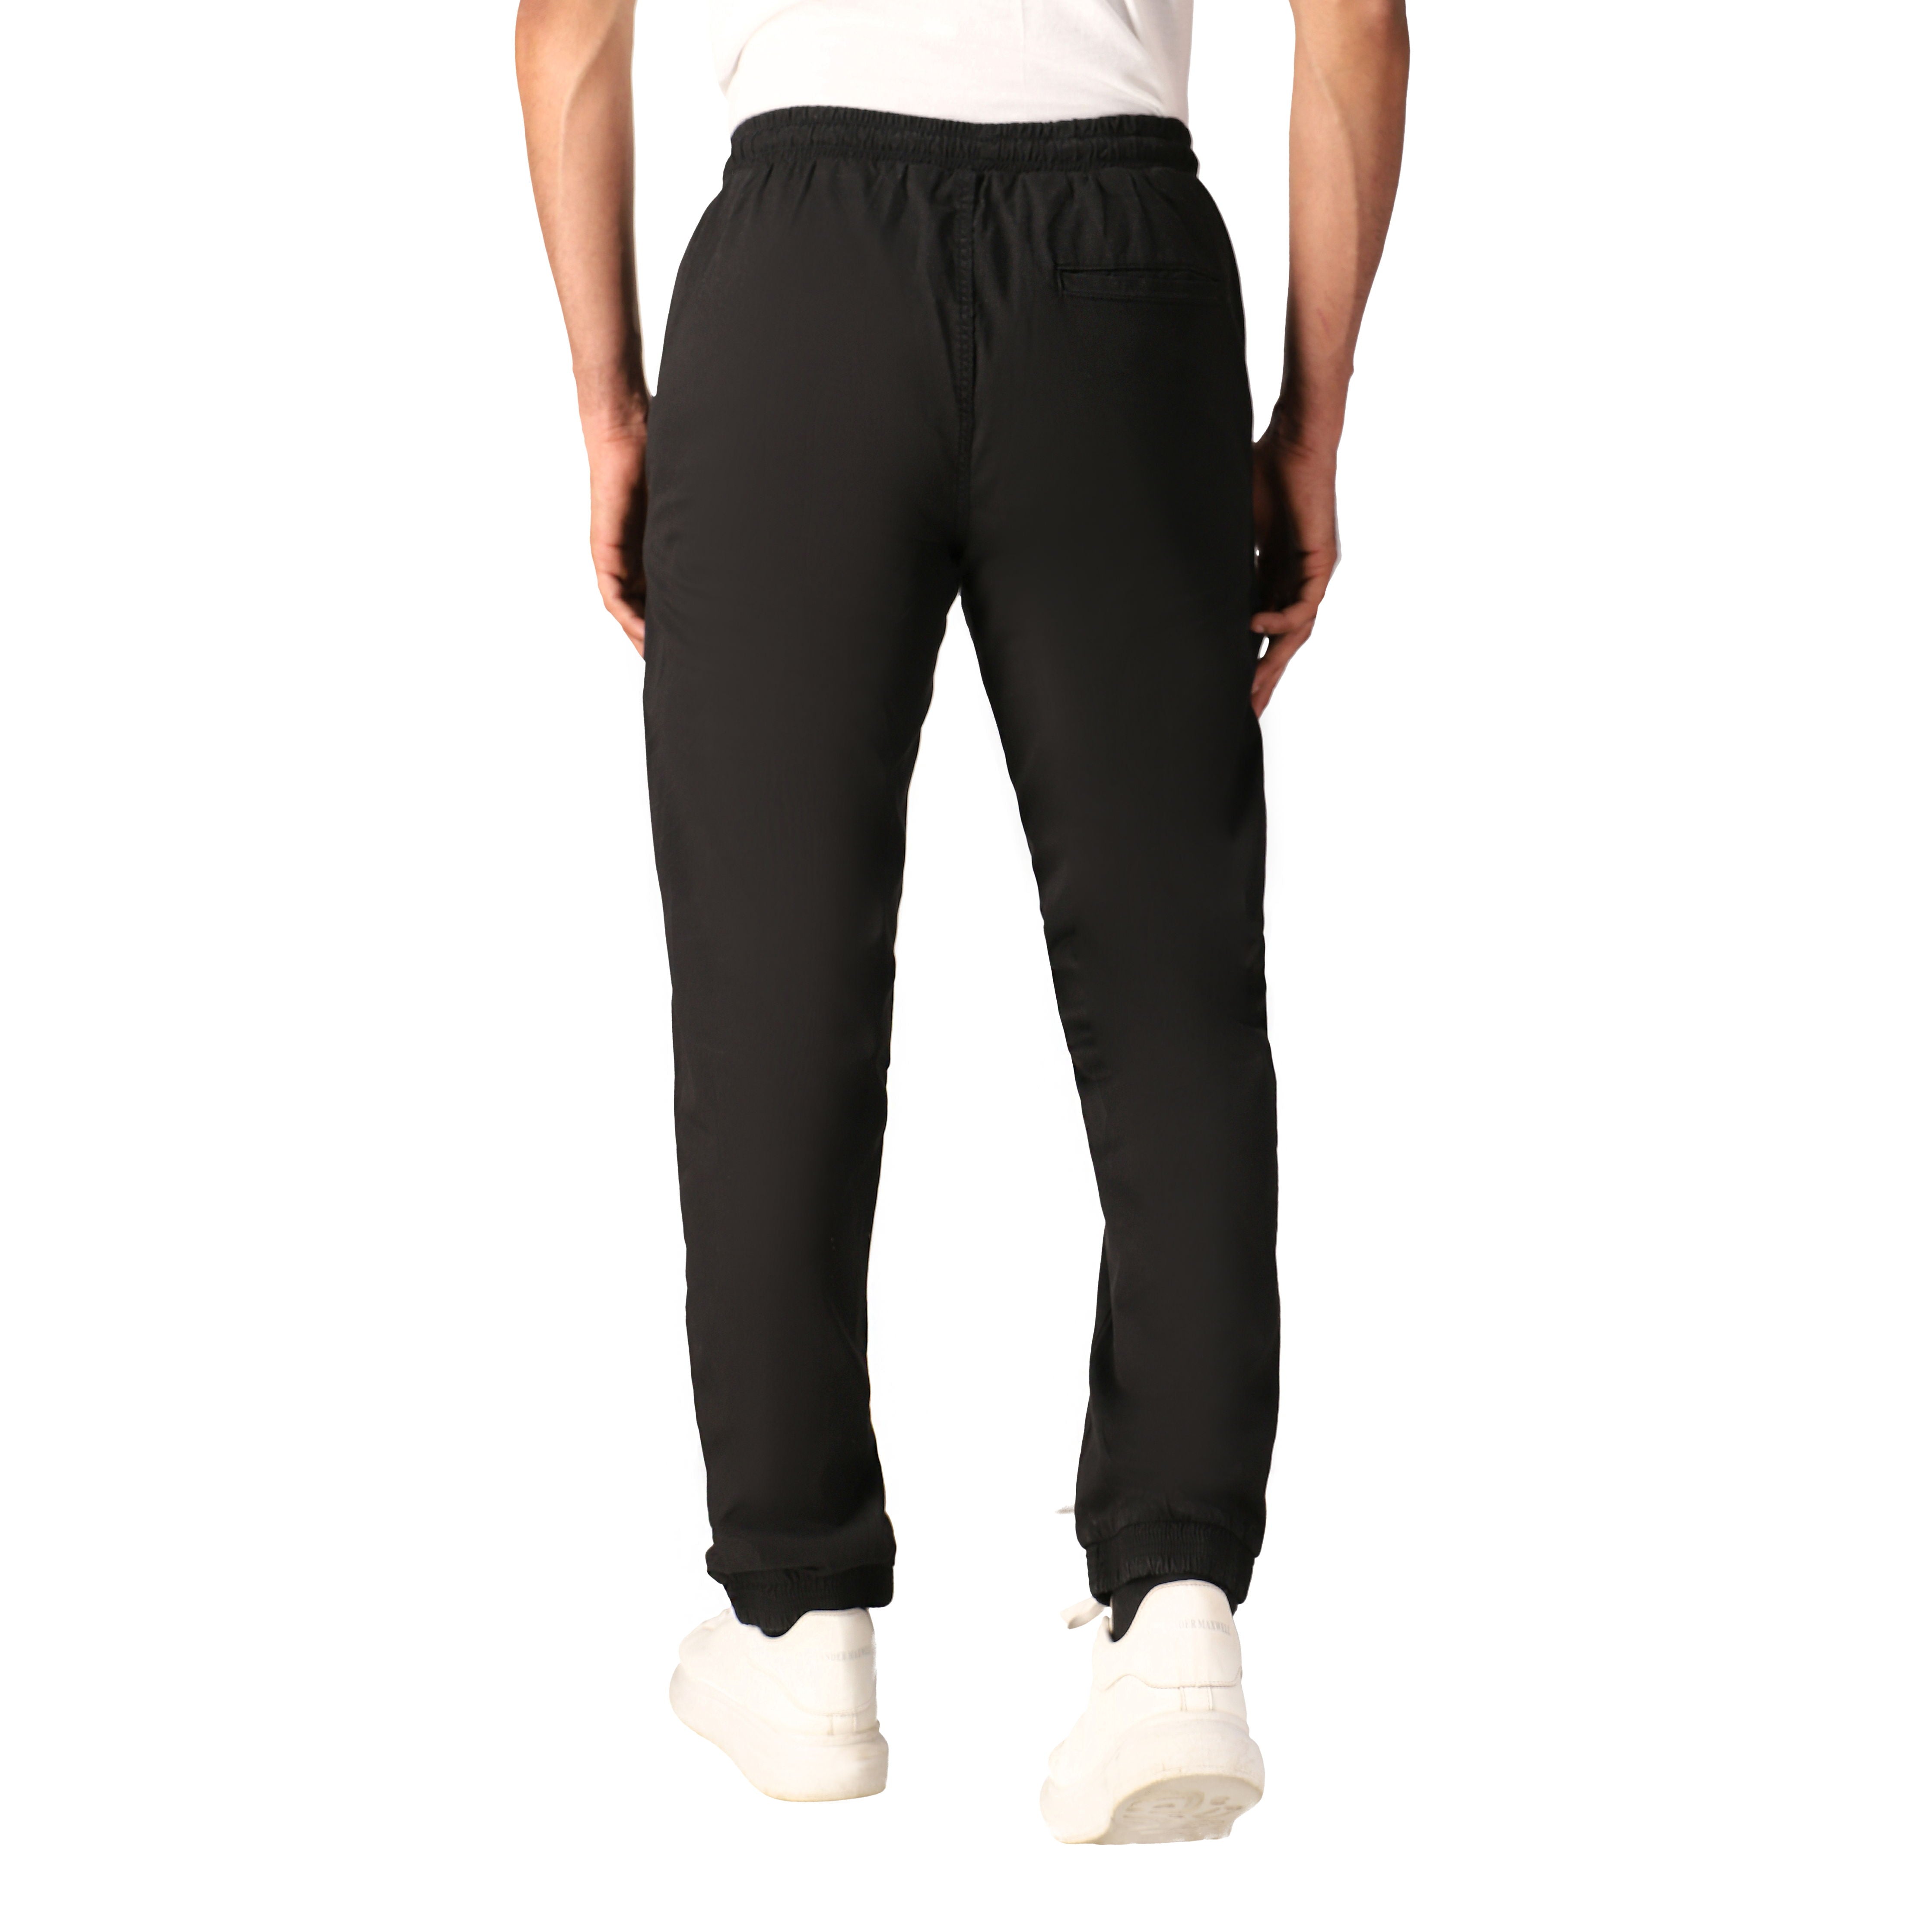 Men's Skinny Joggers in Grey  Stadium Joggers by Avalon Supply